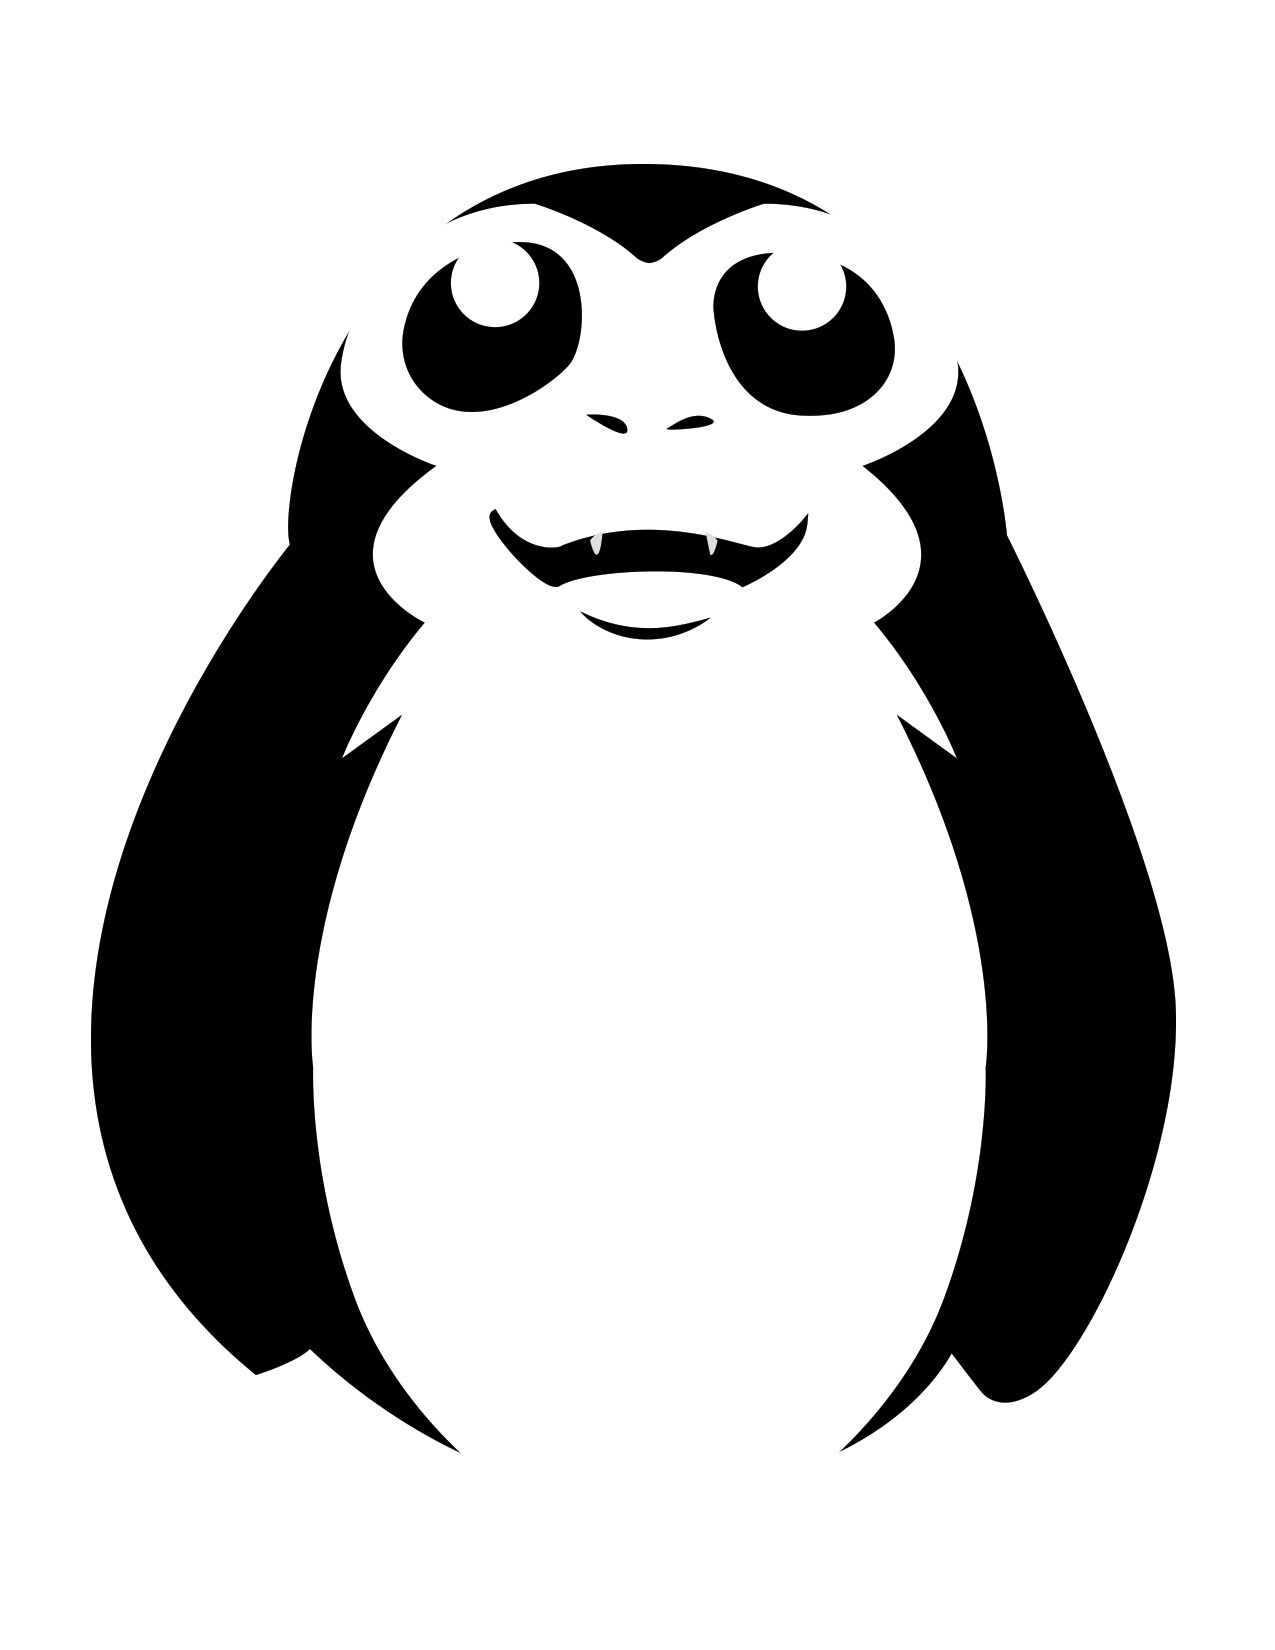 A smiling porg depicted in a minimalist black-and-white graphic style.